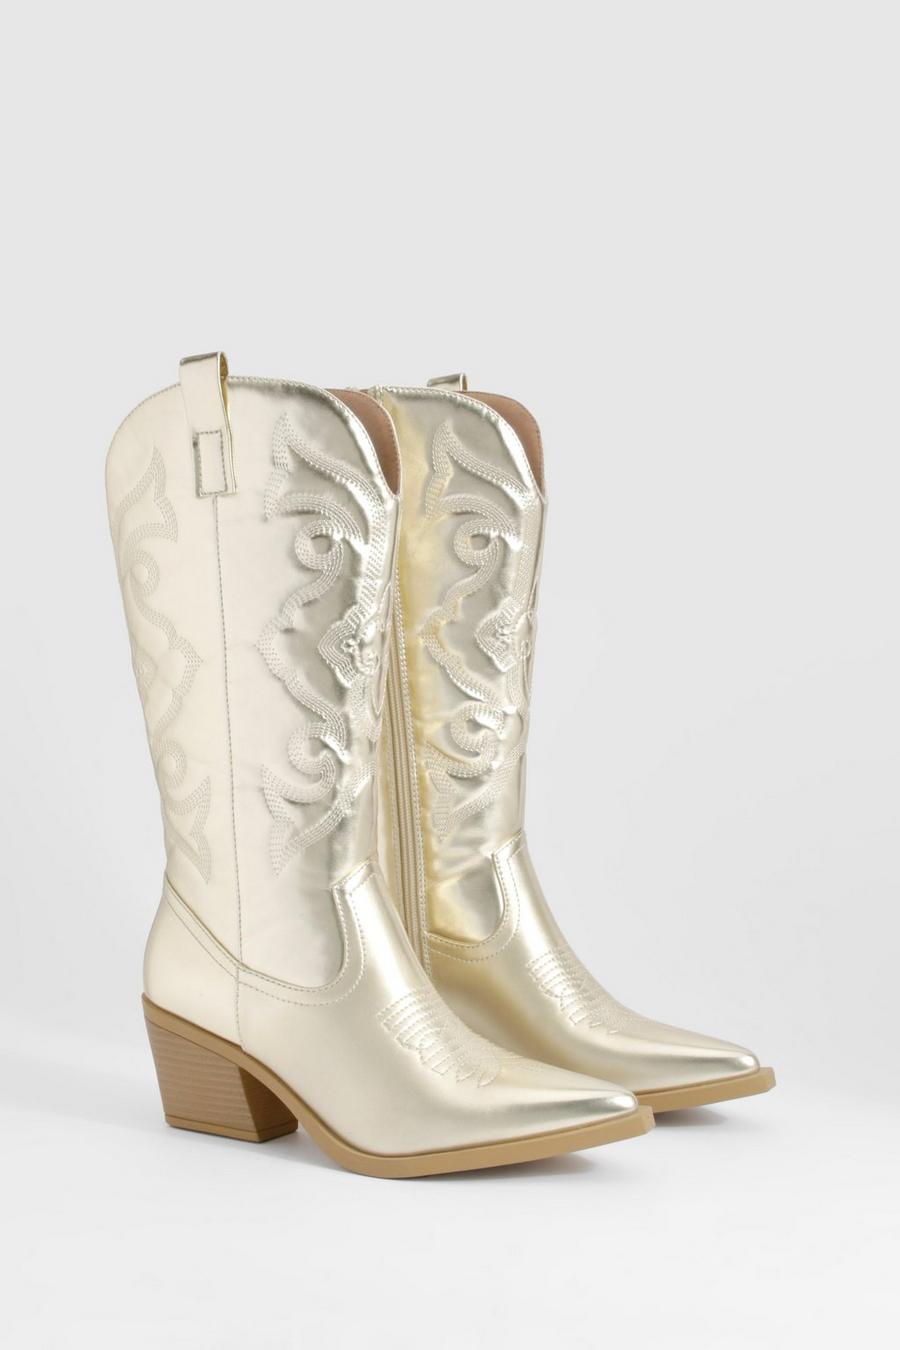 Gold Metallic Embroidered Pu Western Cowboy Boots